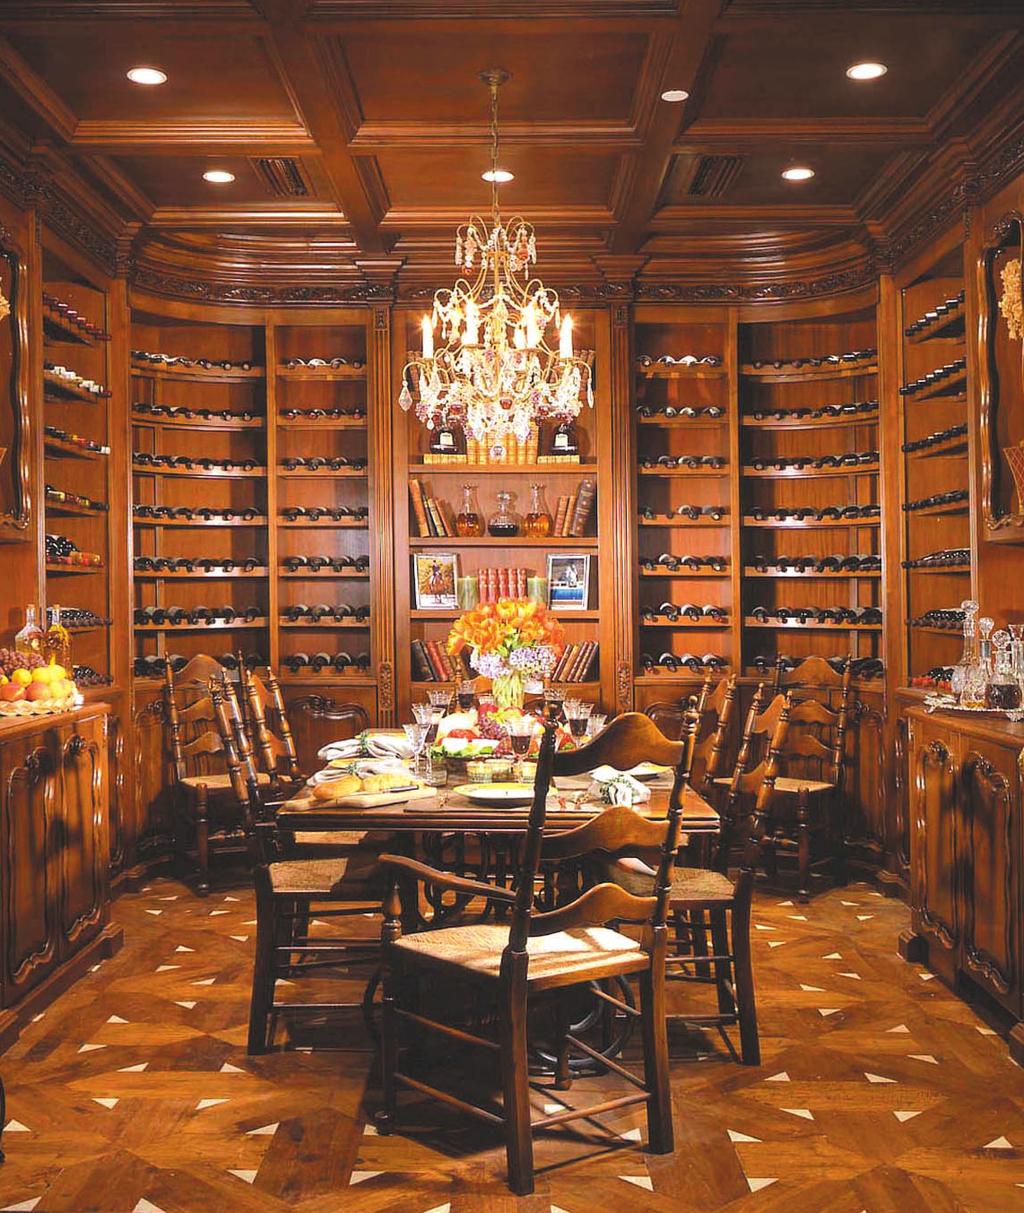 The wine-tasting room with the gorgeous cabinetry was designed to fit 12,500 bottles that is reminiscent of the baronial mood, states the designer.